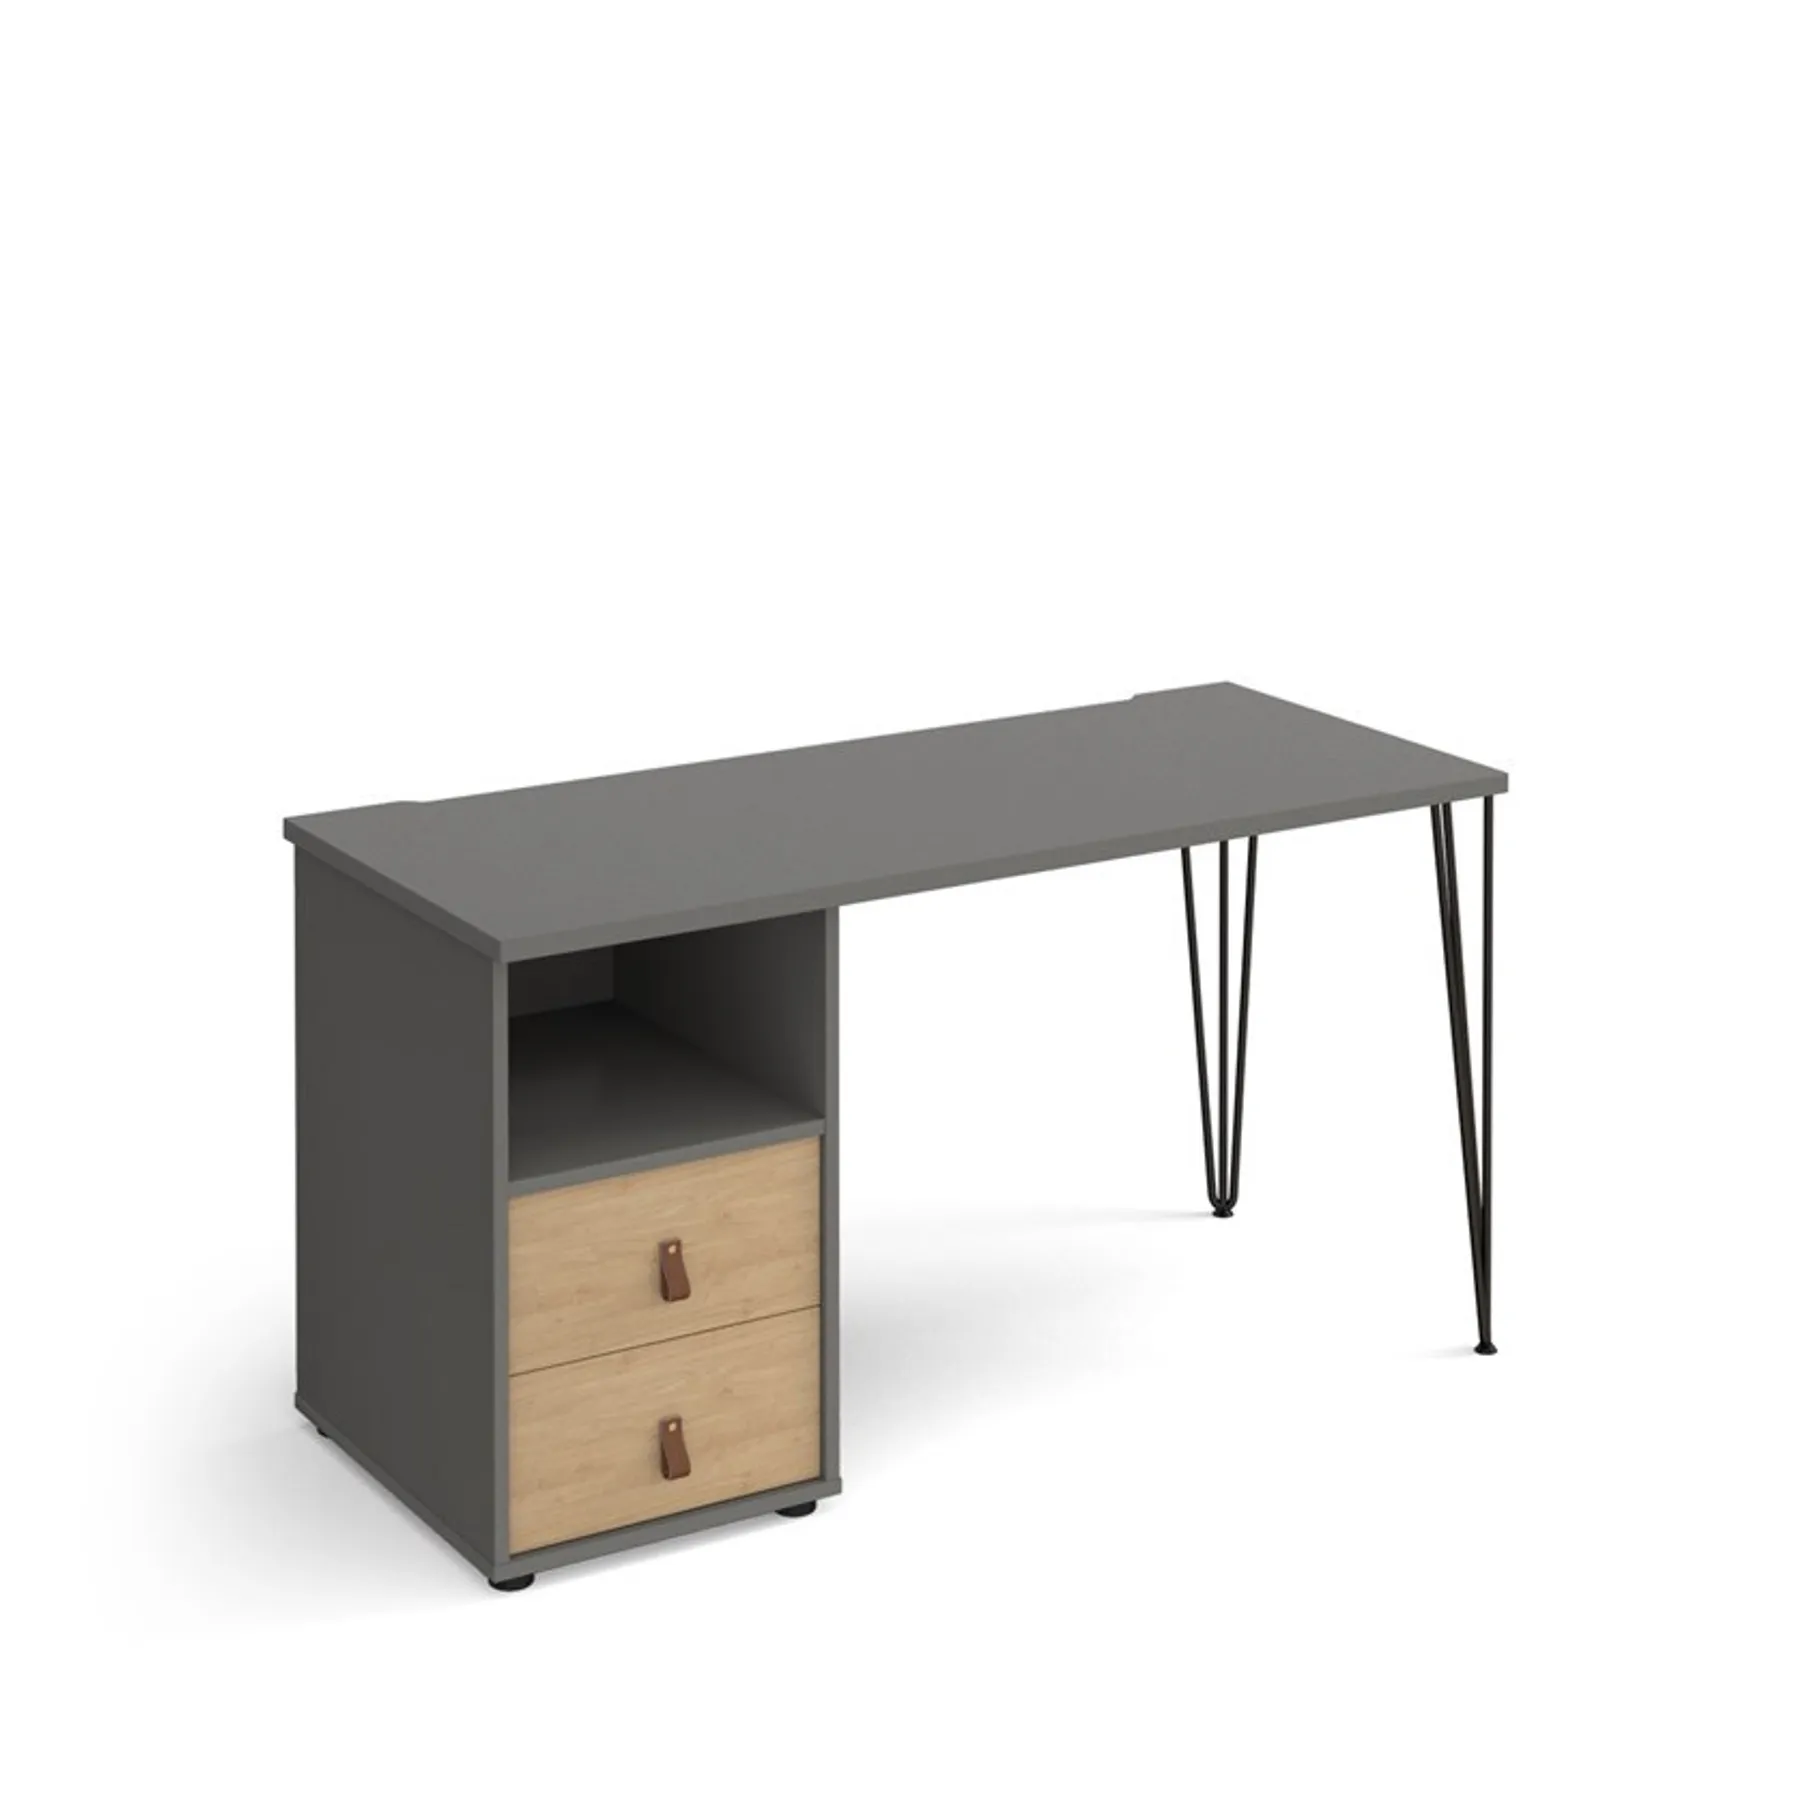 LOF Direct Dams Tikal Hairpin Home Office Desk with drawers Grey Oak TK614 P D